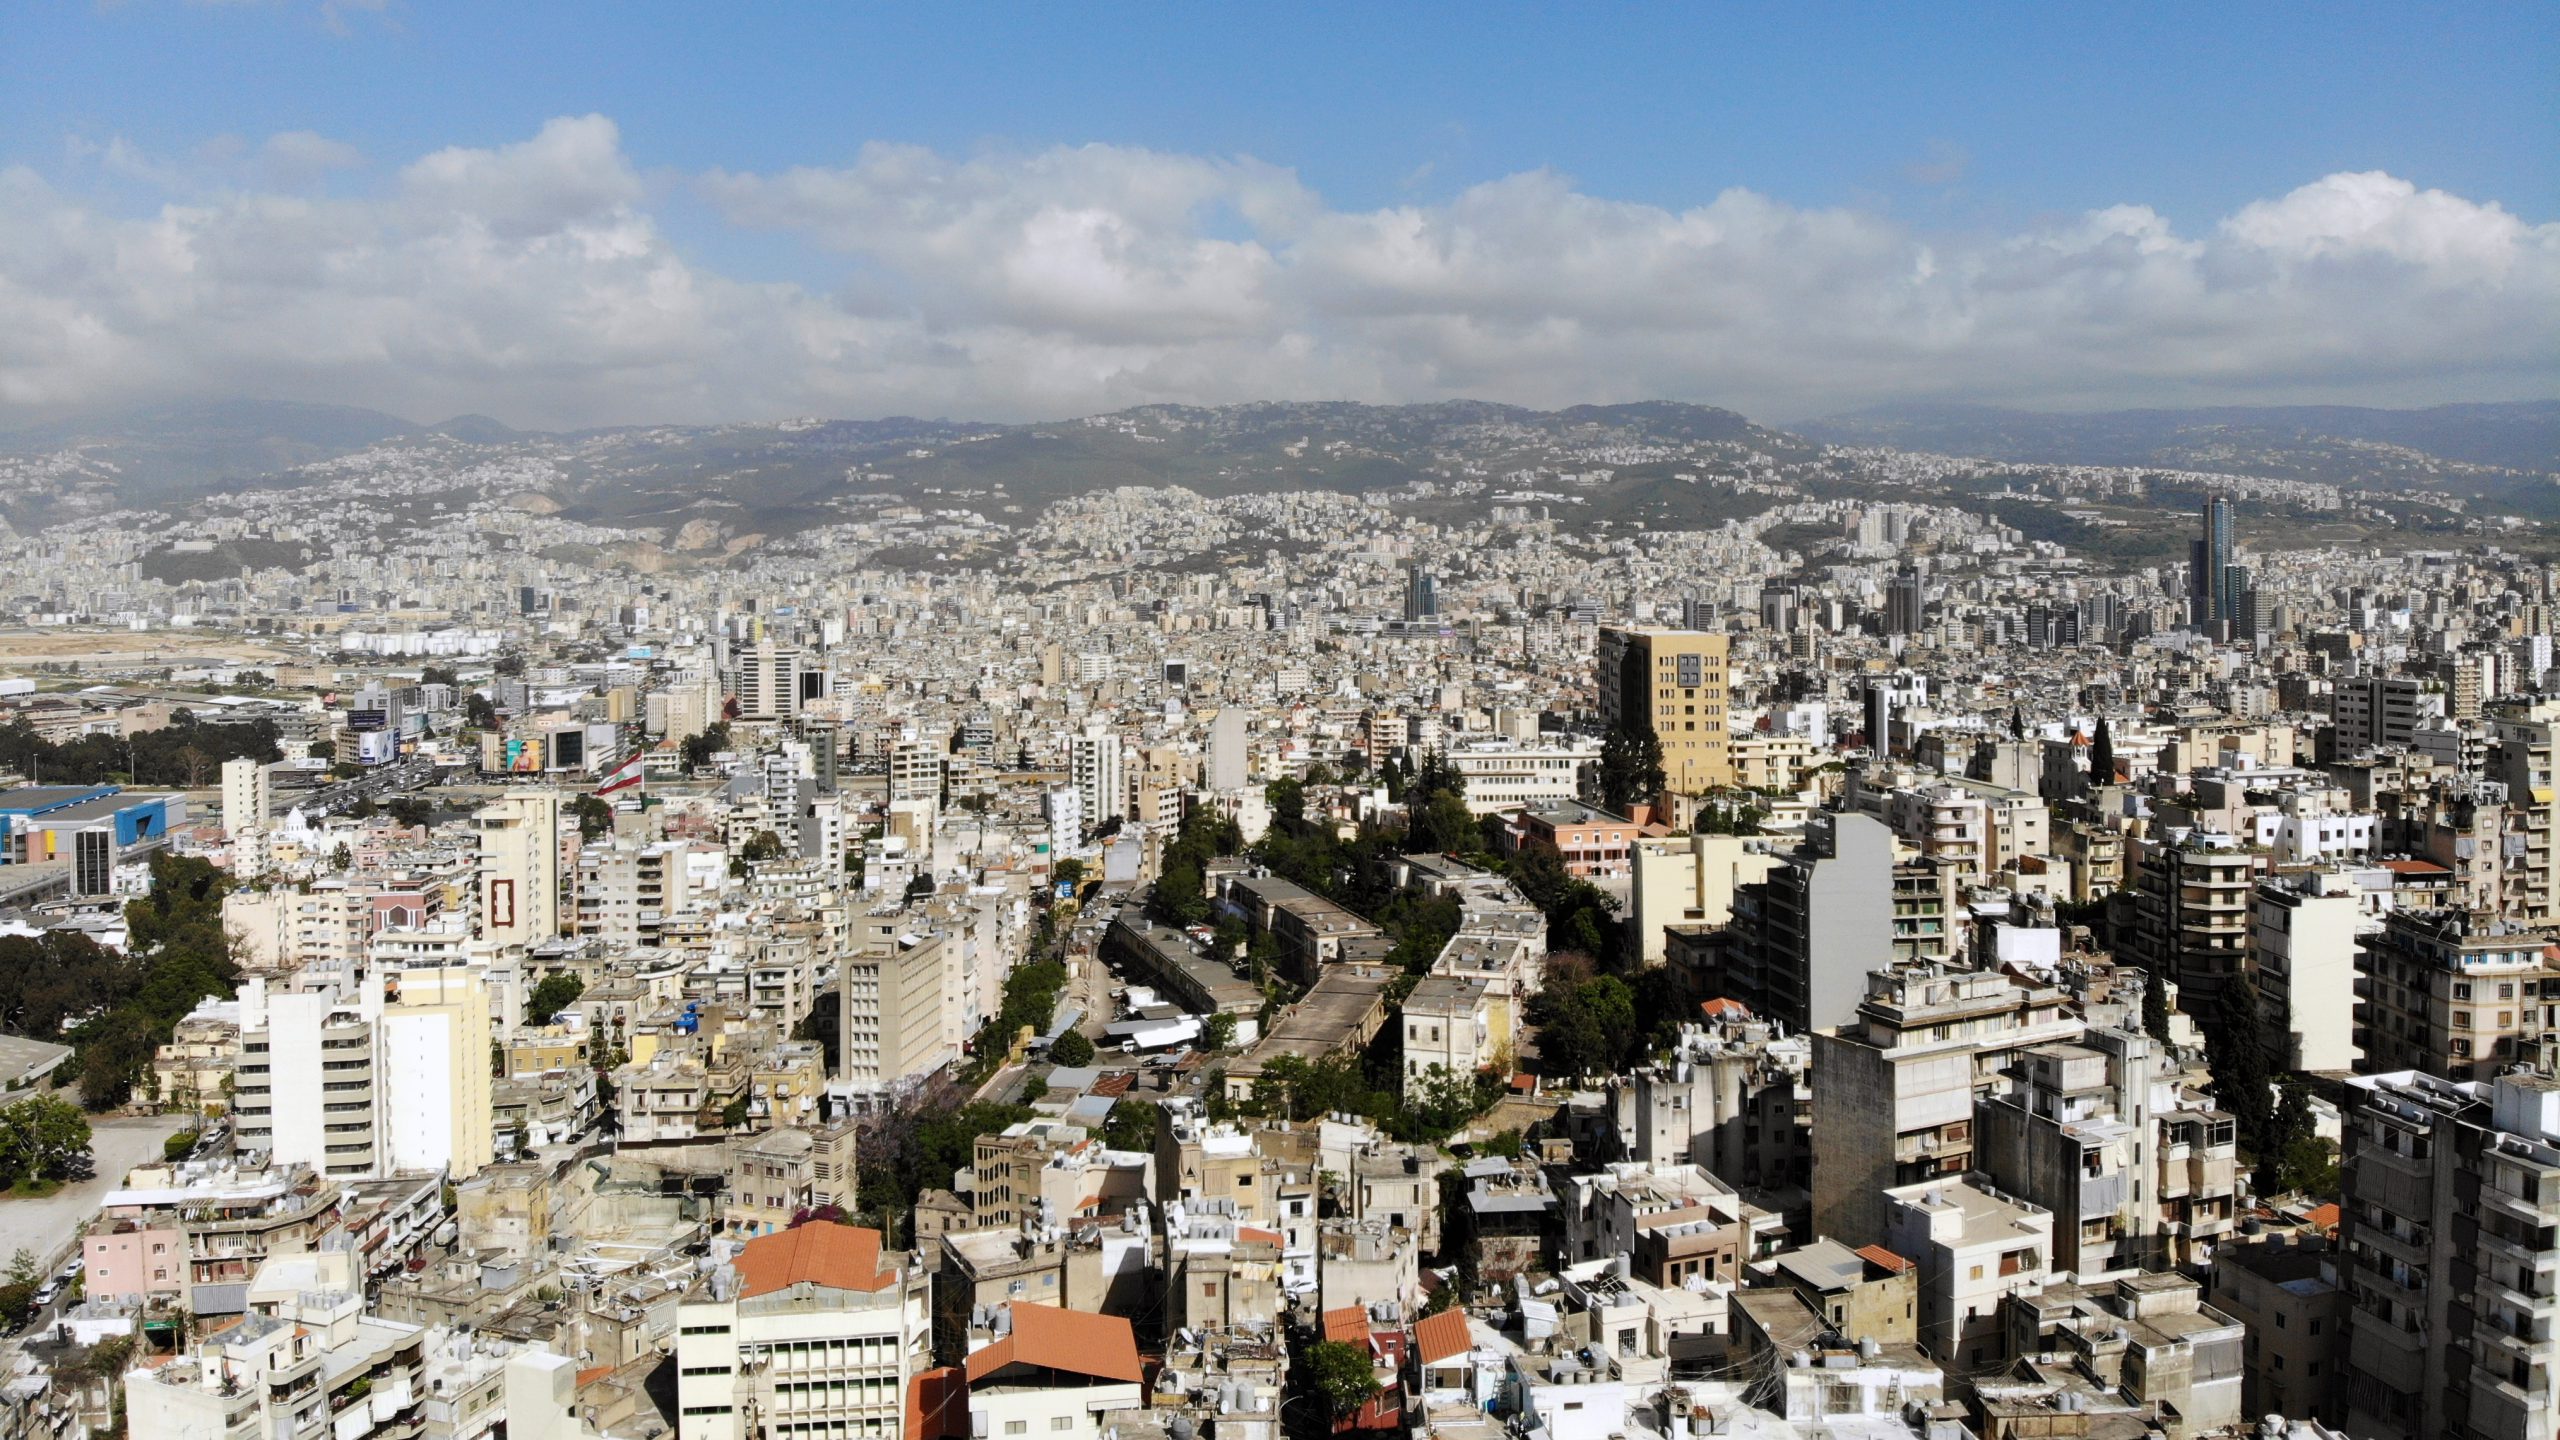 Drone shot of Beirut \ Rent crisis article